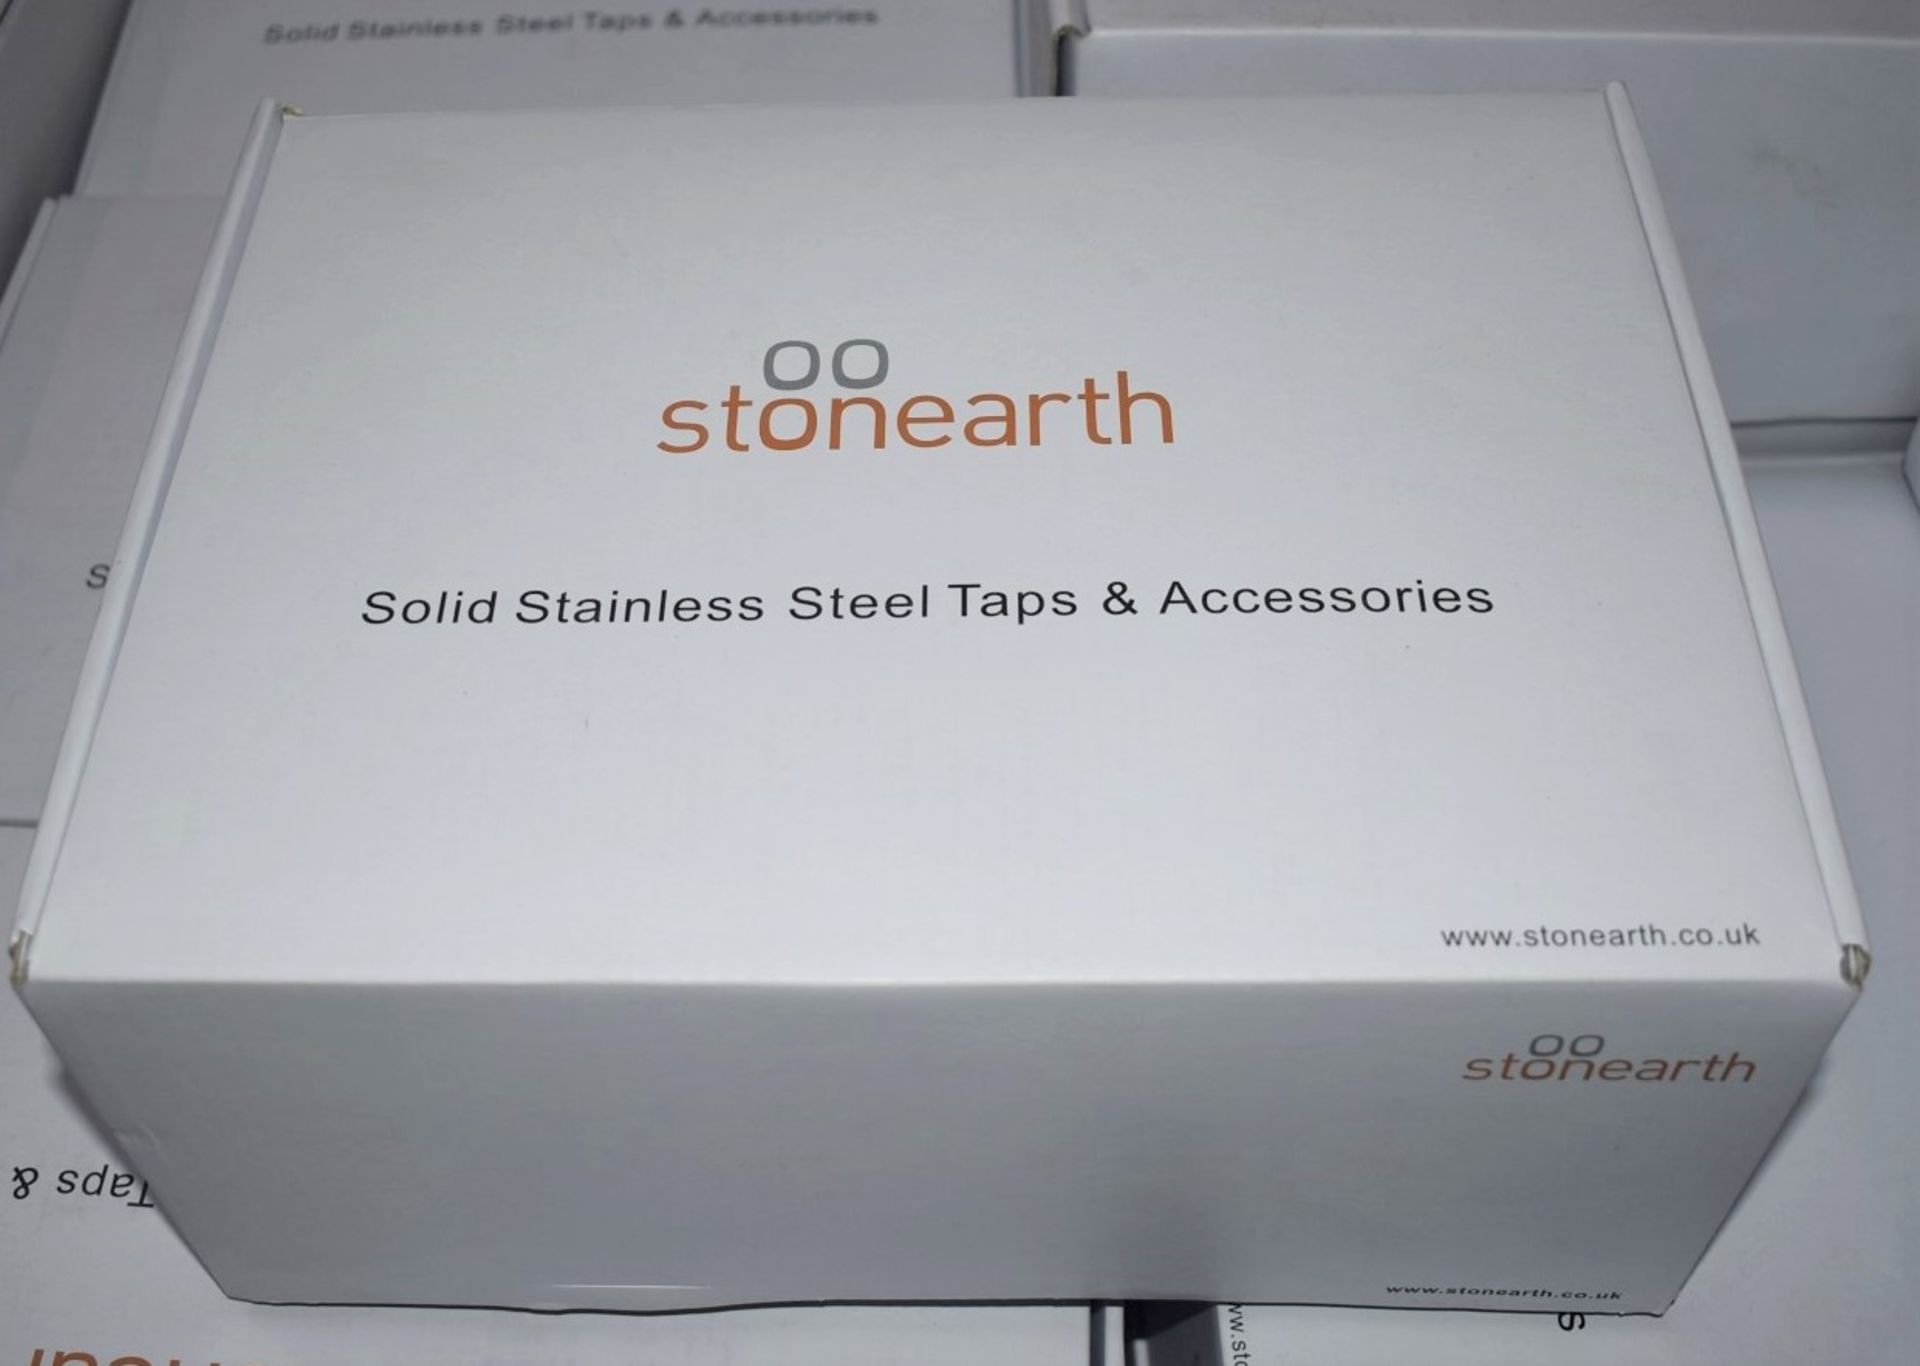 4 x Stonearth 'Metro' Stainless Steel Wall Mounted Taps - Brand New & Boxed - RRP £1,380 - Ref: - Image 7 of 8